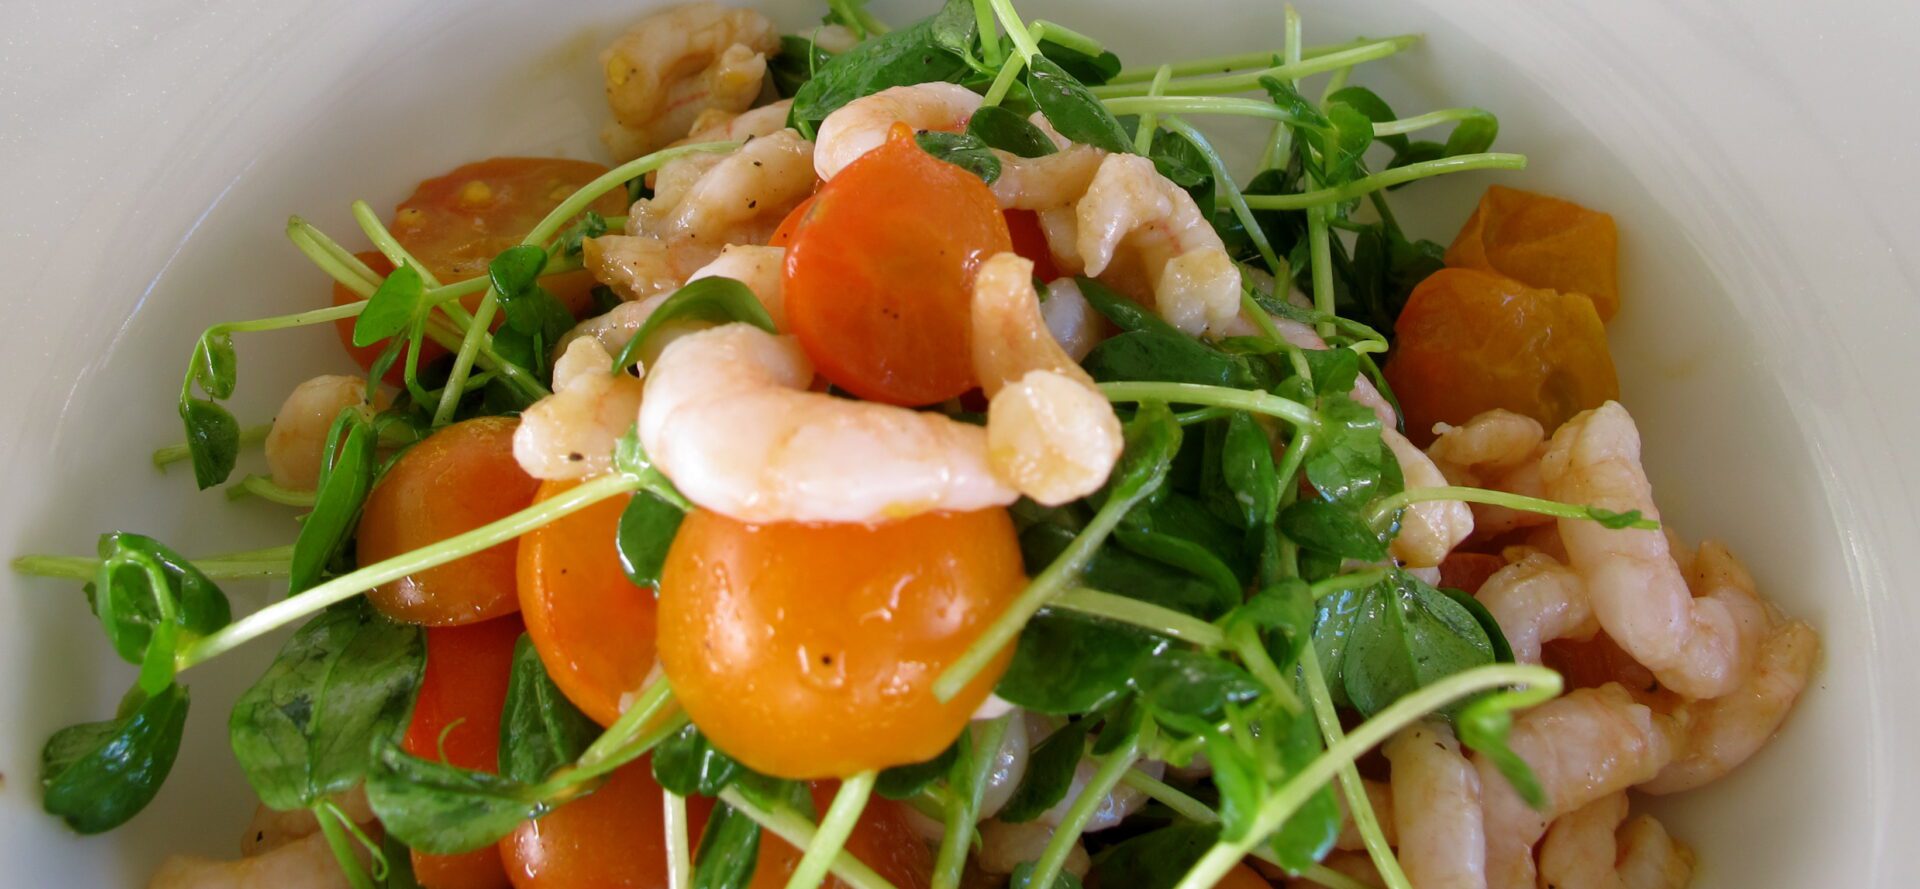 A white plate with shrimp, tomatoes and greens.